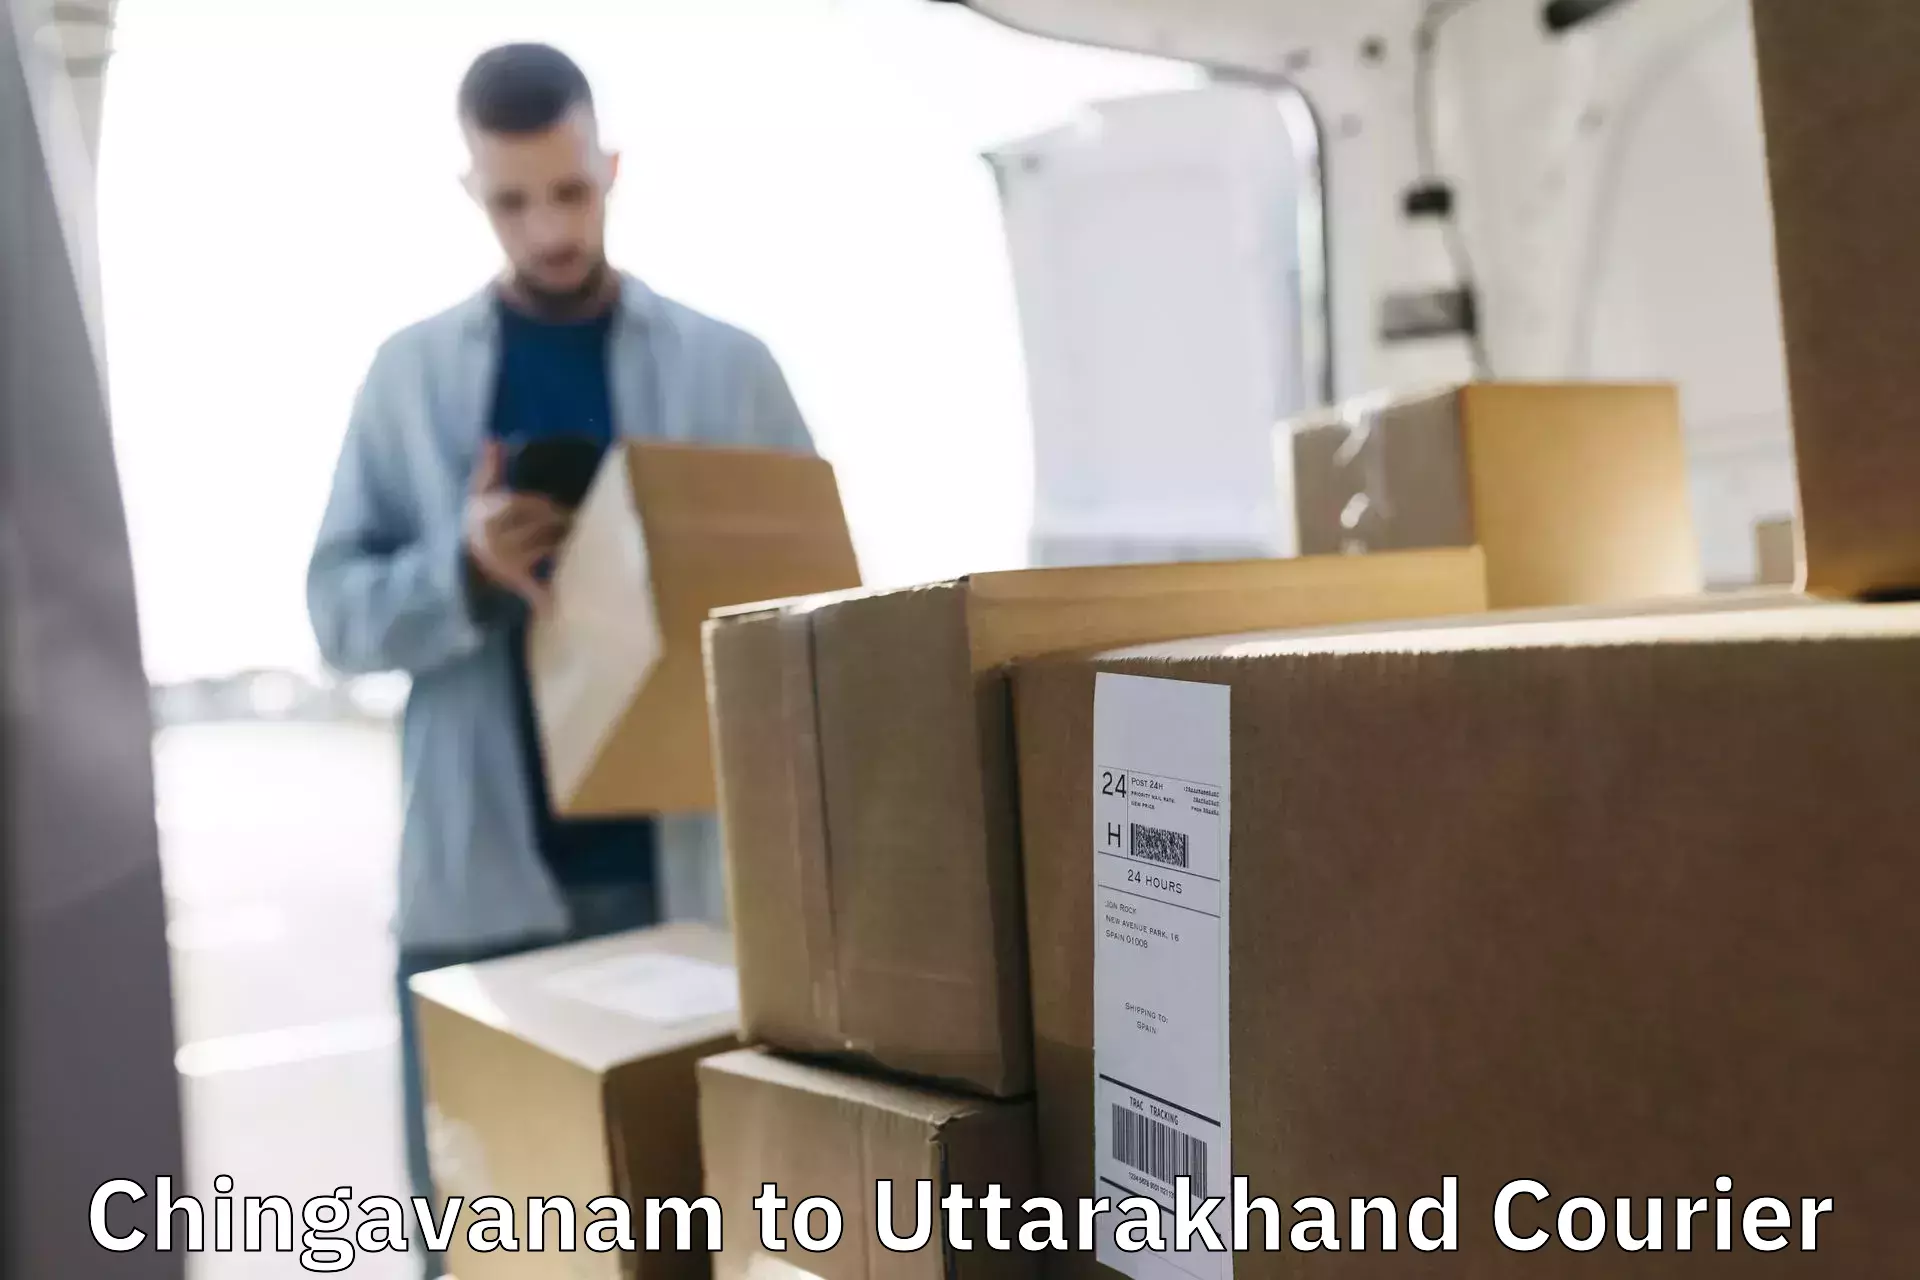 Multi-national courier services Chingavanam to Rudraprayag